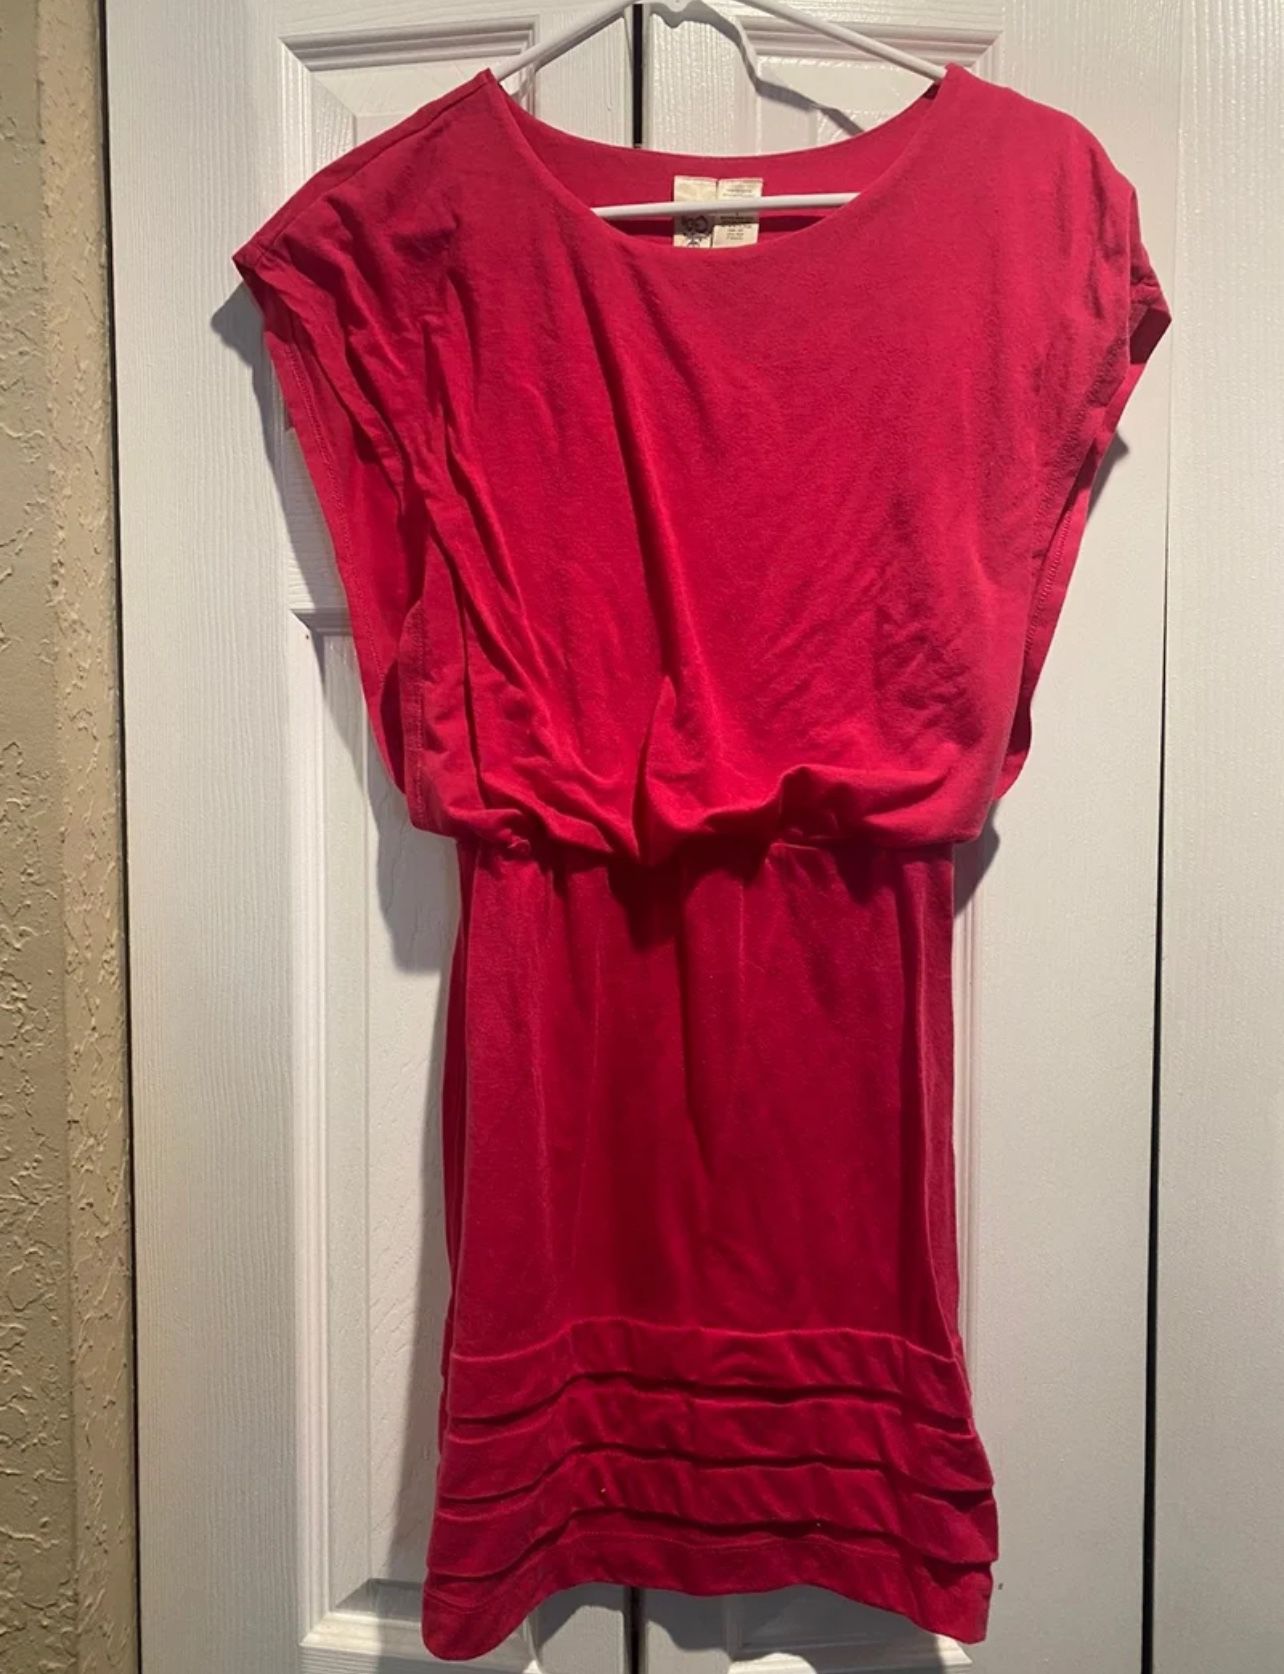 Size S pink dress  Pencil cut bottom and oversized top